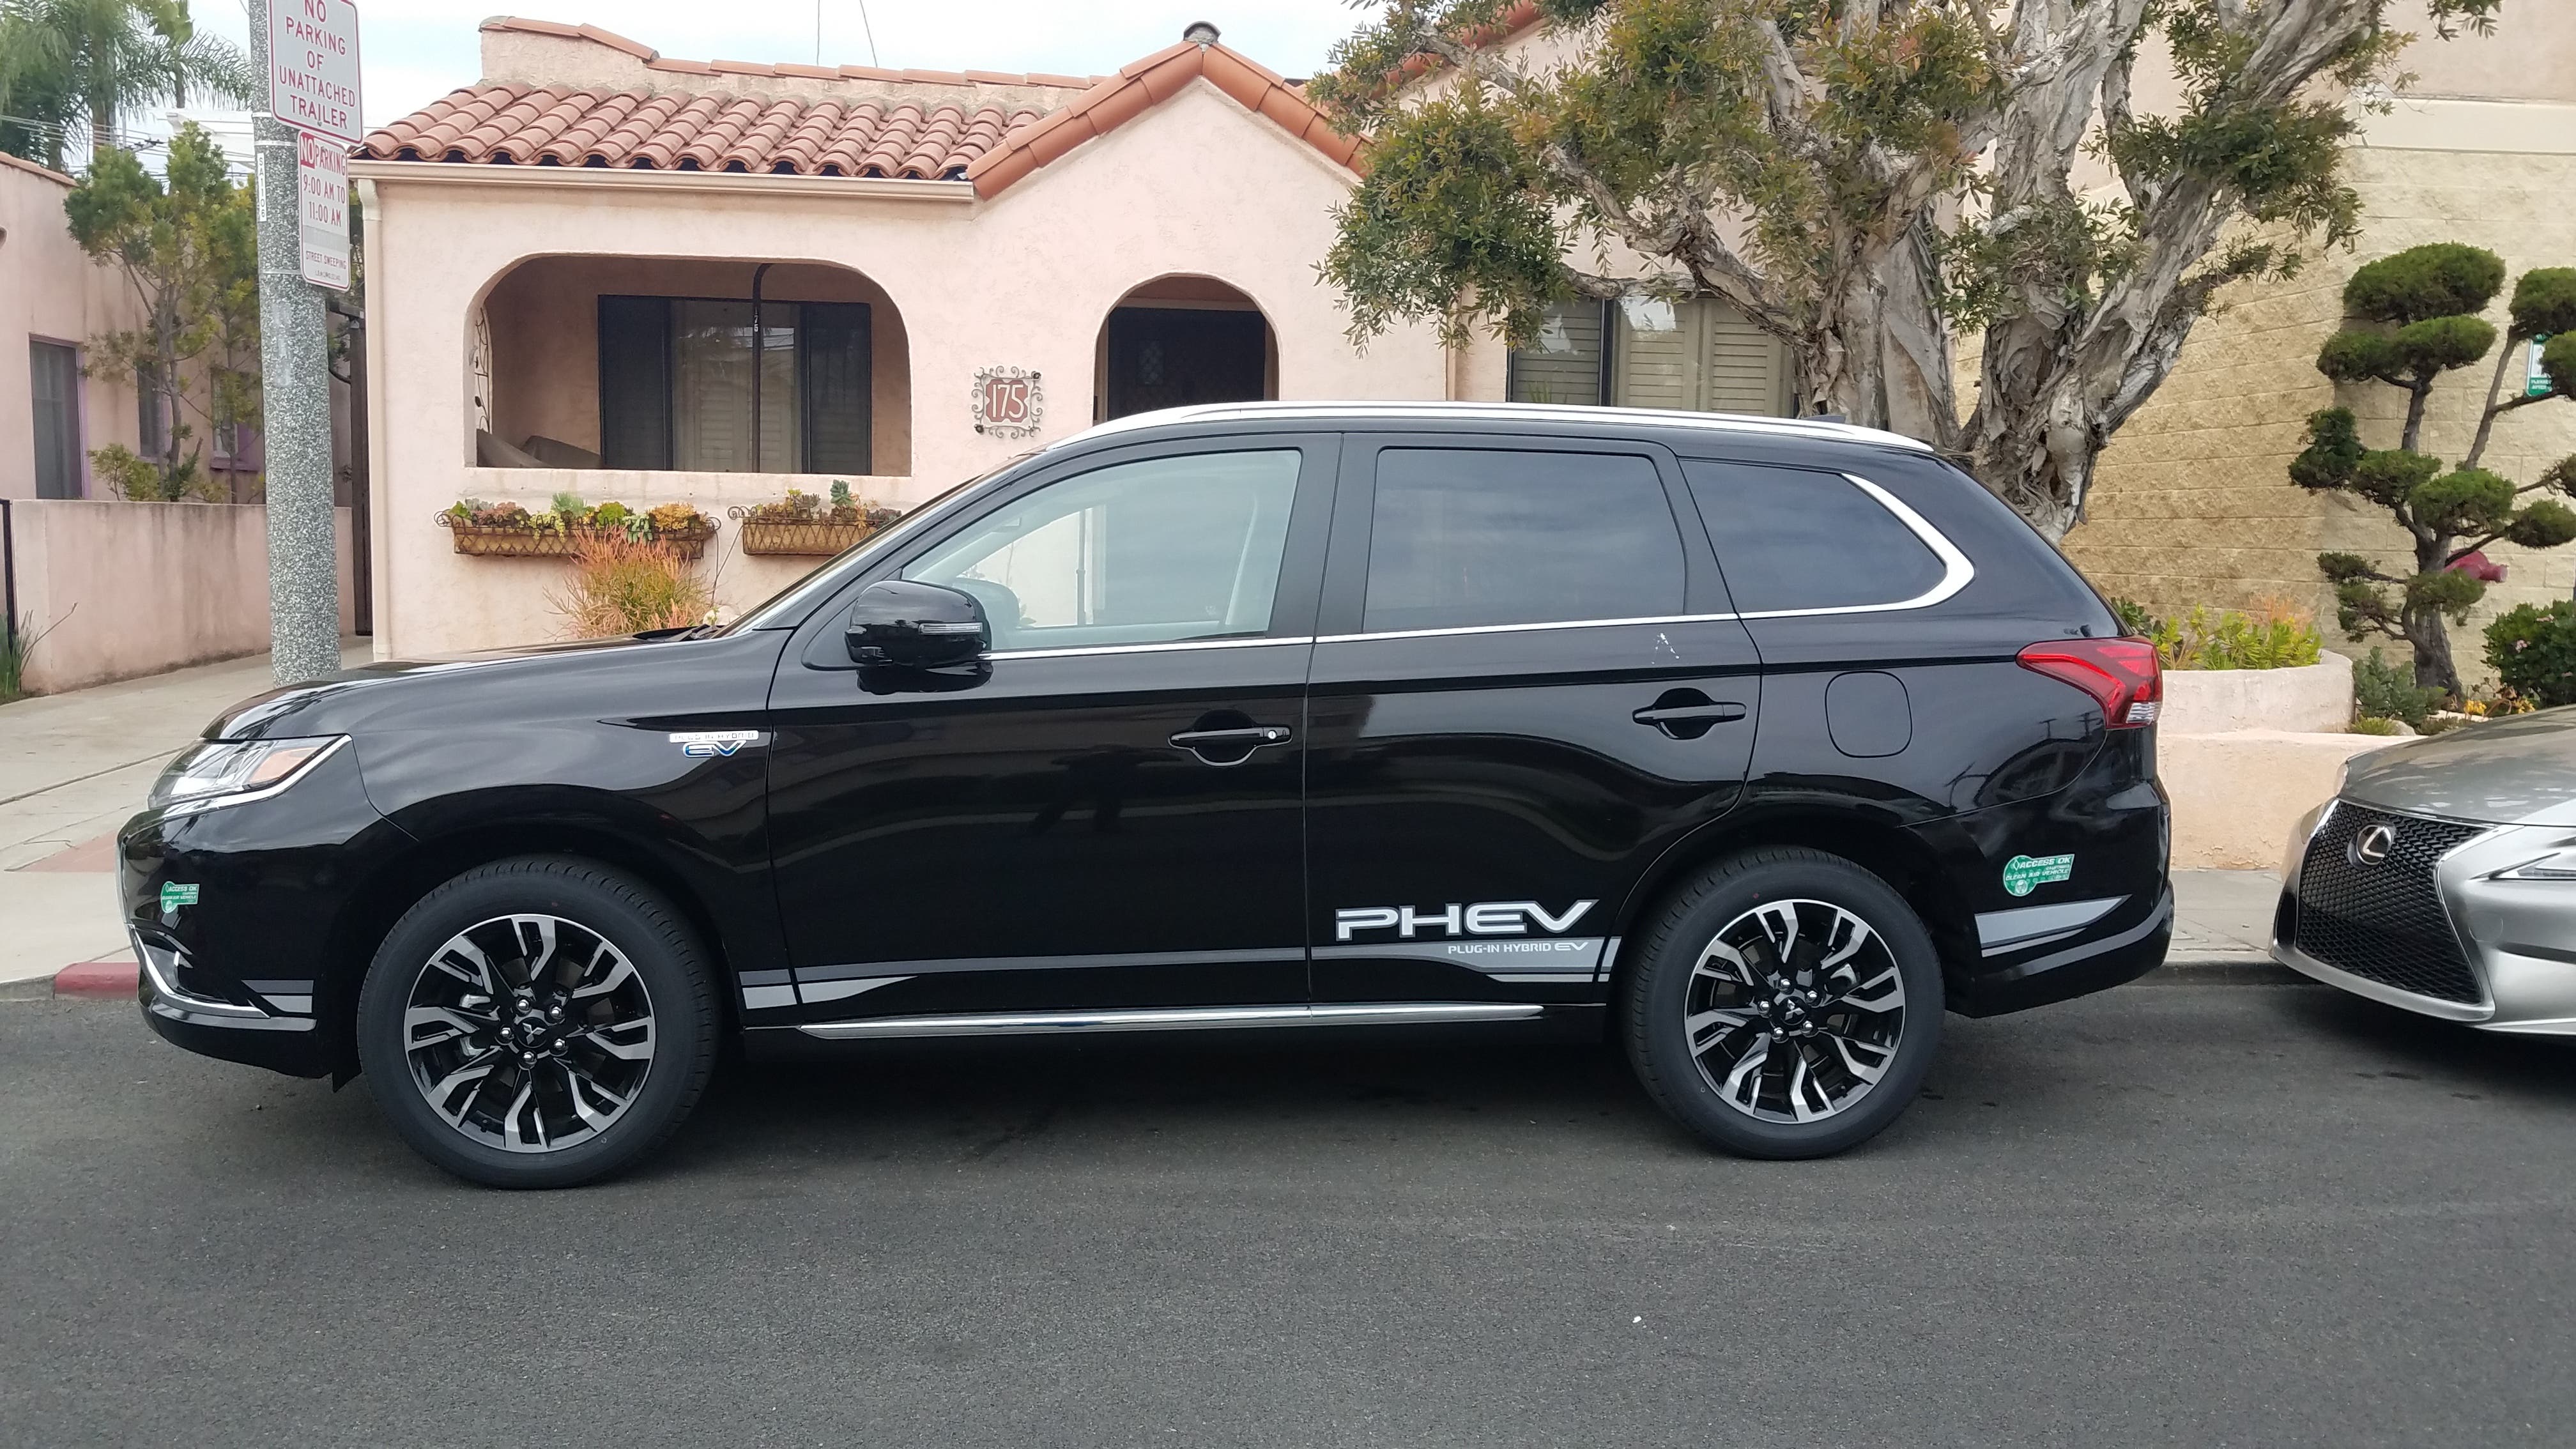 1 Week Behind The Wheel Of The 2018 Mitsubishi Outlander PHEV —  CleanTechnica Review, Part 2 - CleanTechnica